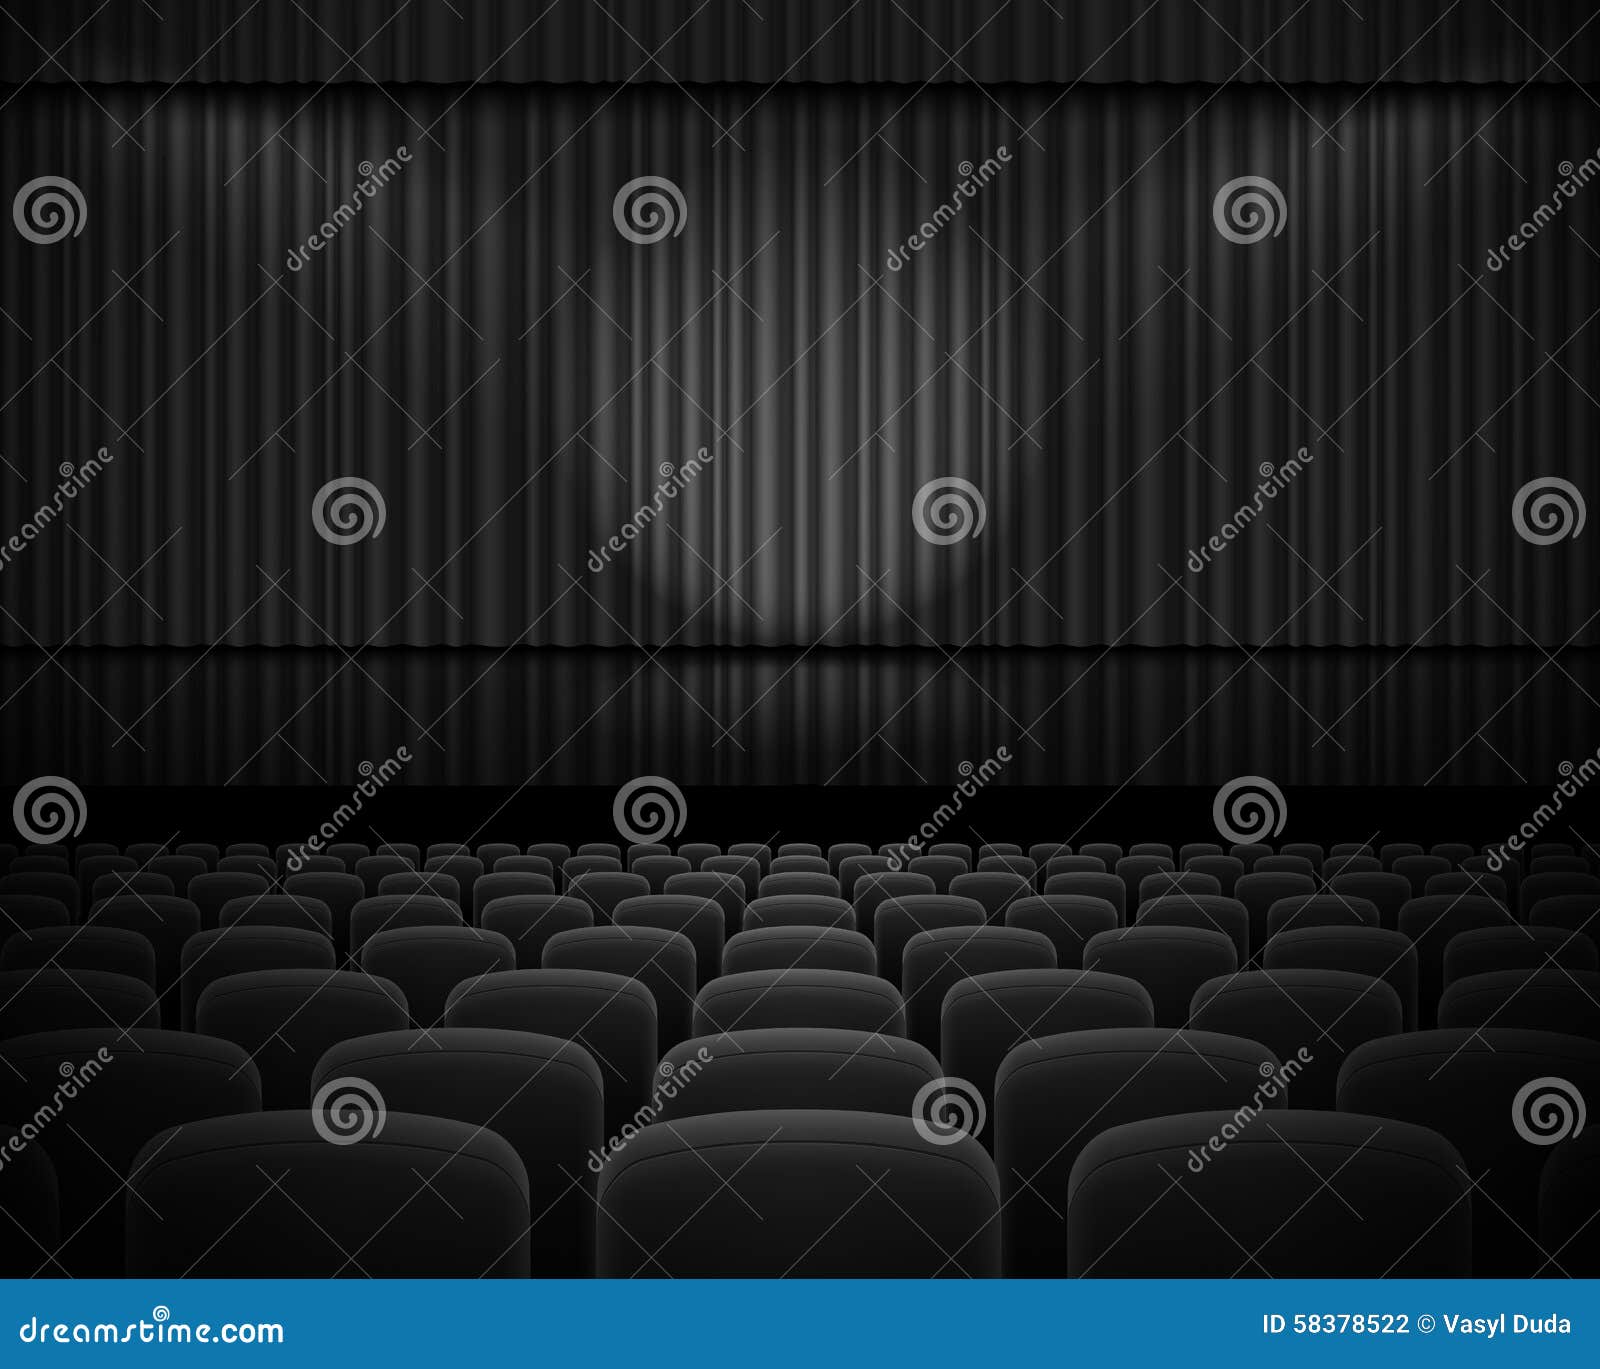 Theater hall stock vector. Illustration of classical - 58378522